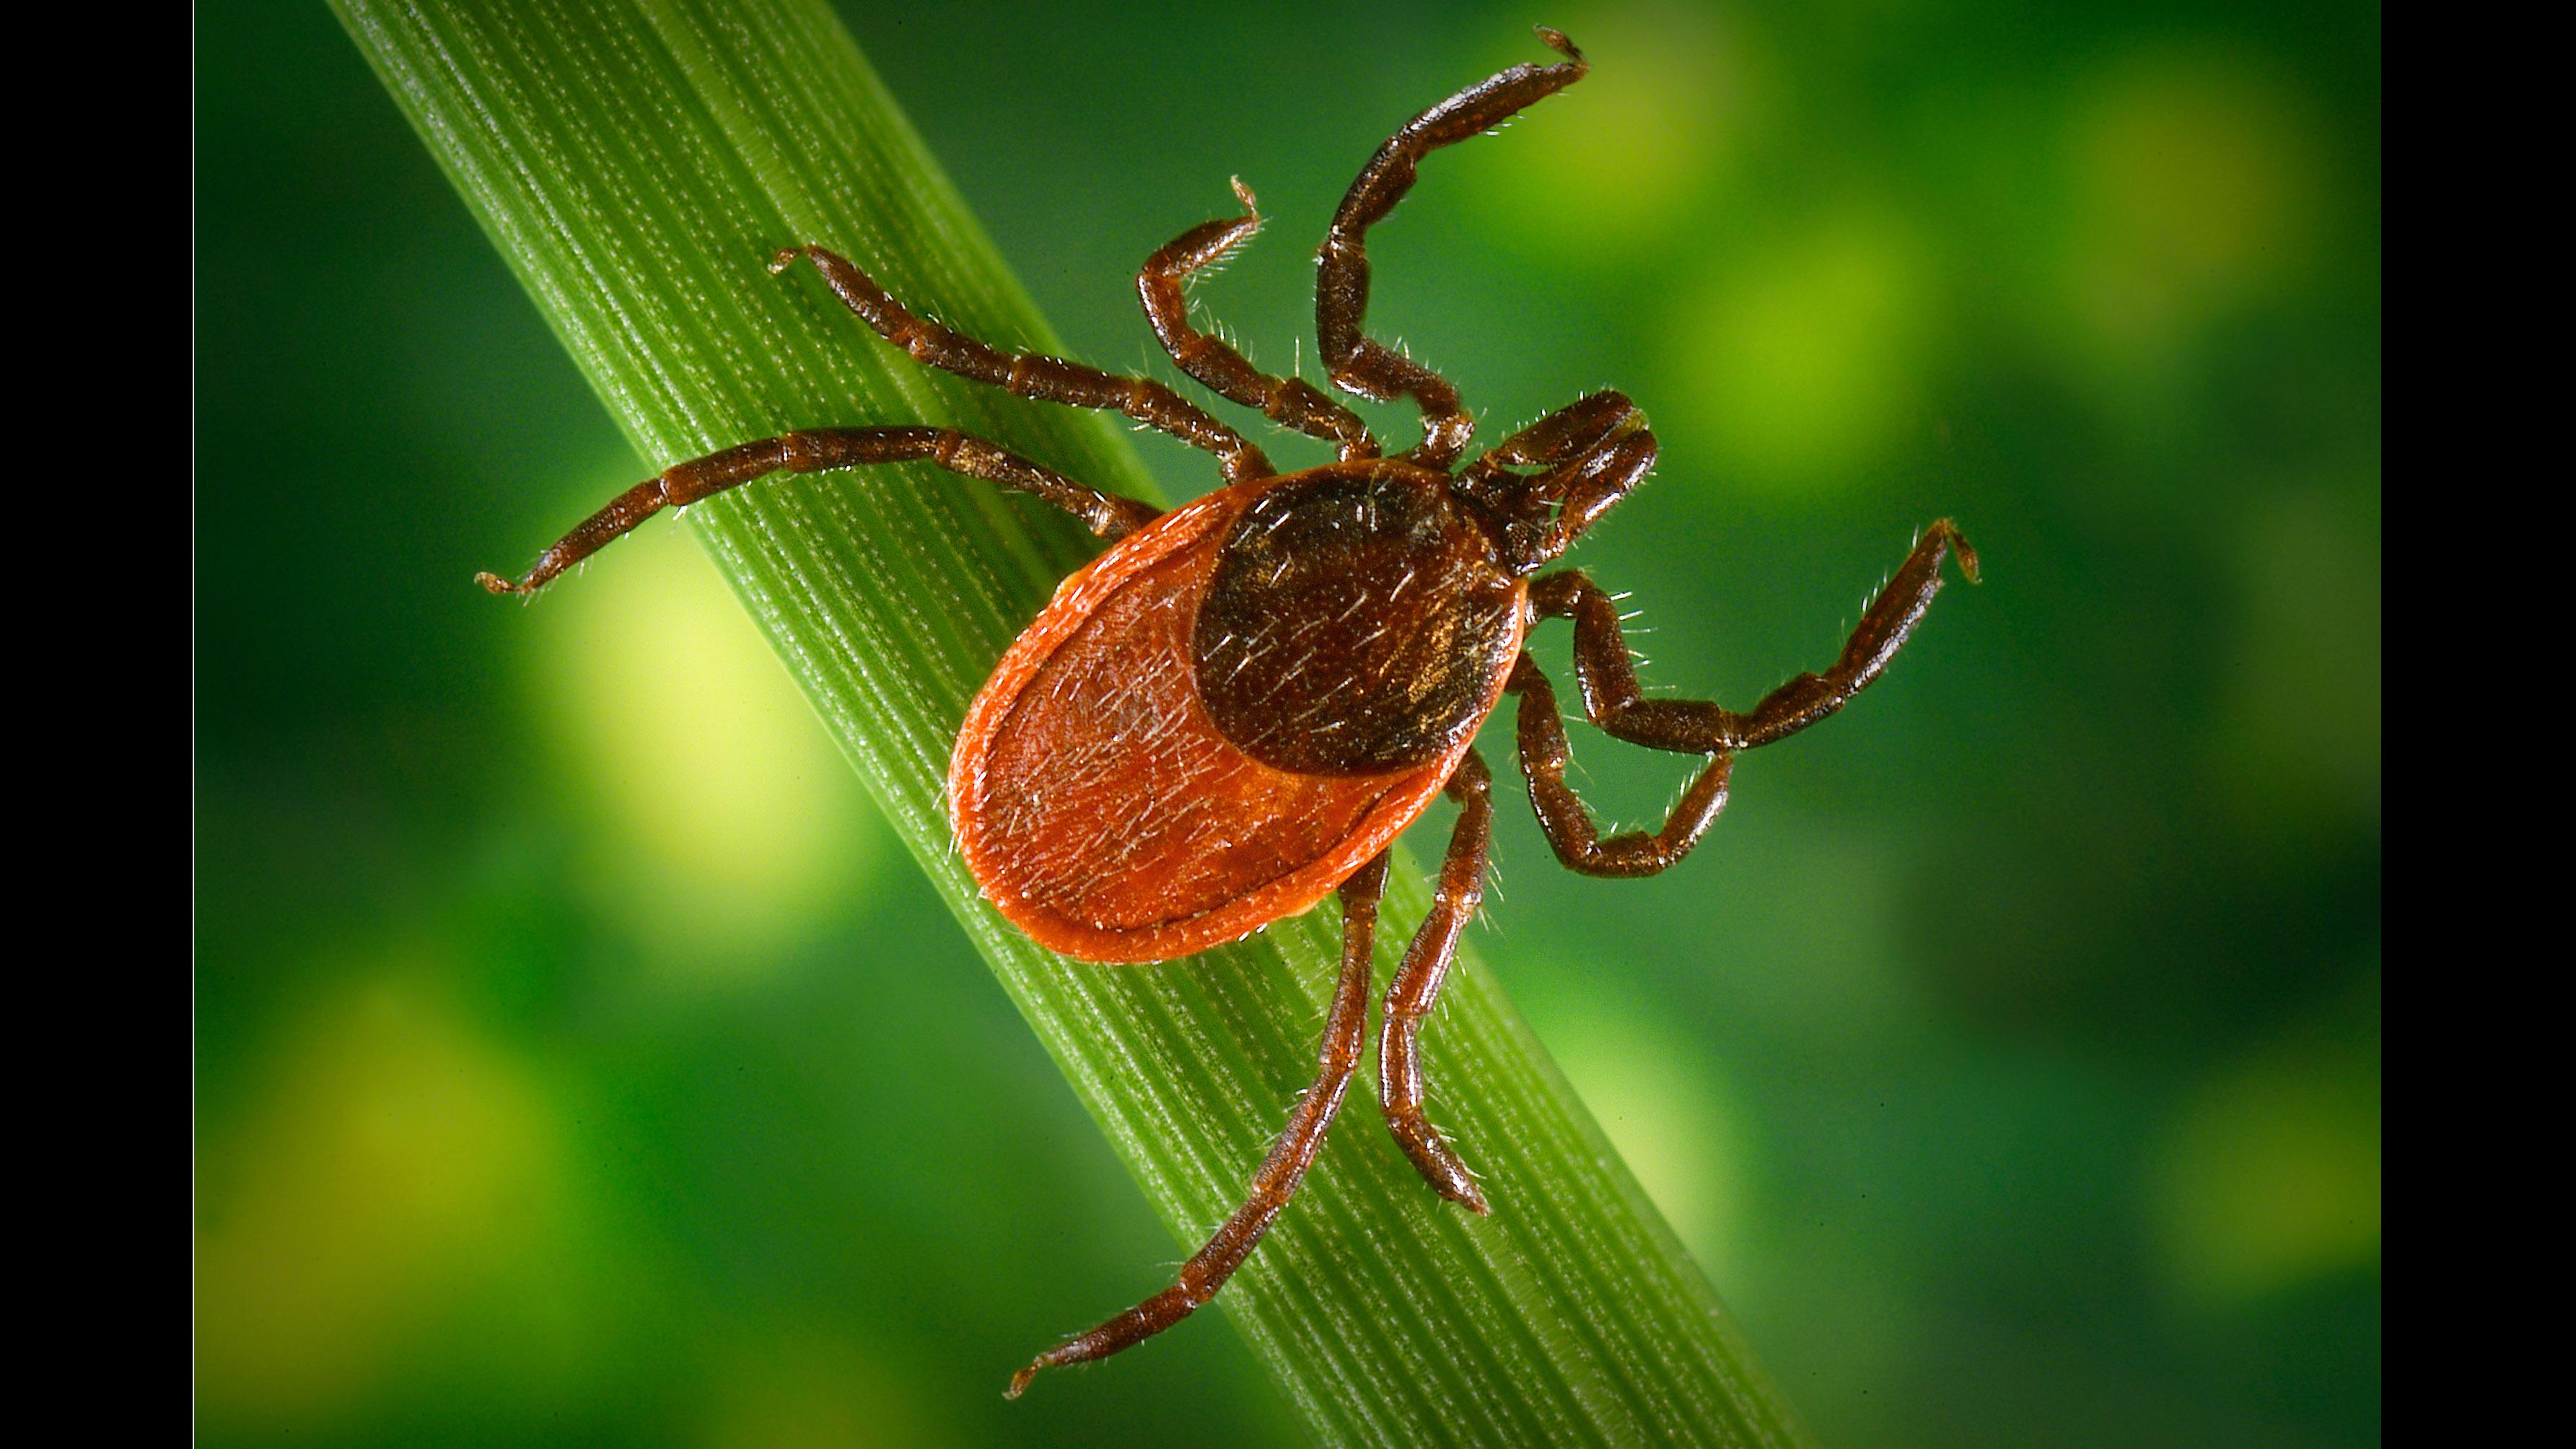 The blacklegged tick, also known as the deer tick, is one of three types of ticks found in Illinois that transmit illnesses via their bite to humans. (James Gathany / CDC)